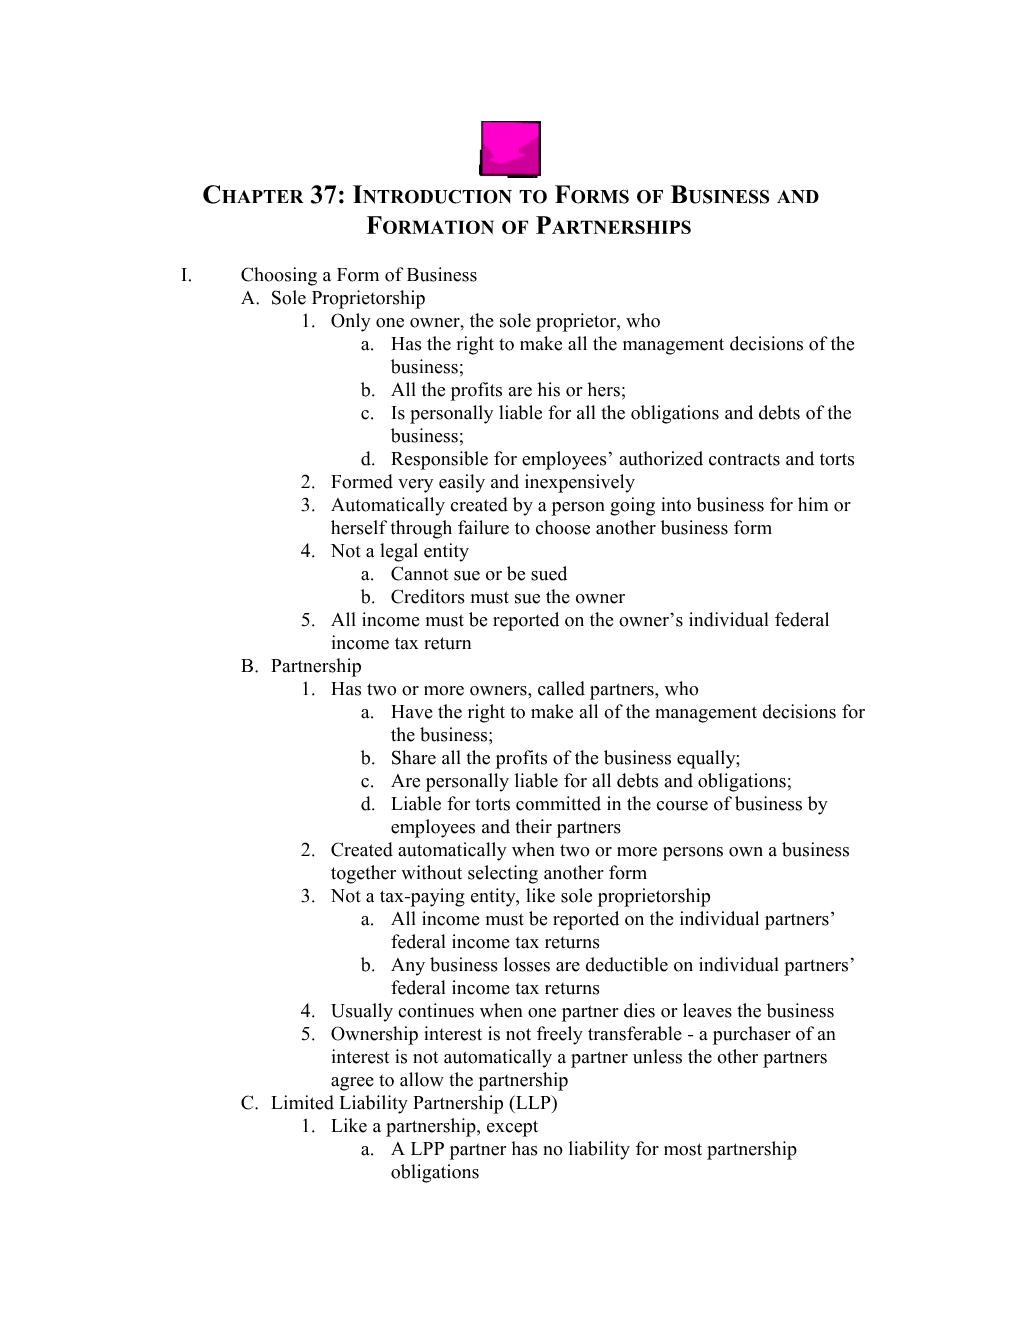 Chapter 37: Introduction to Forms of Business and Formation of Partnerships